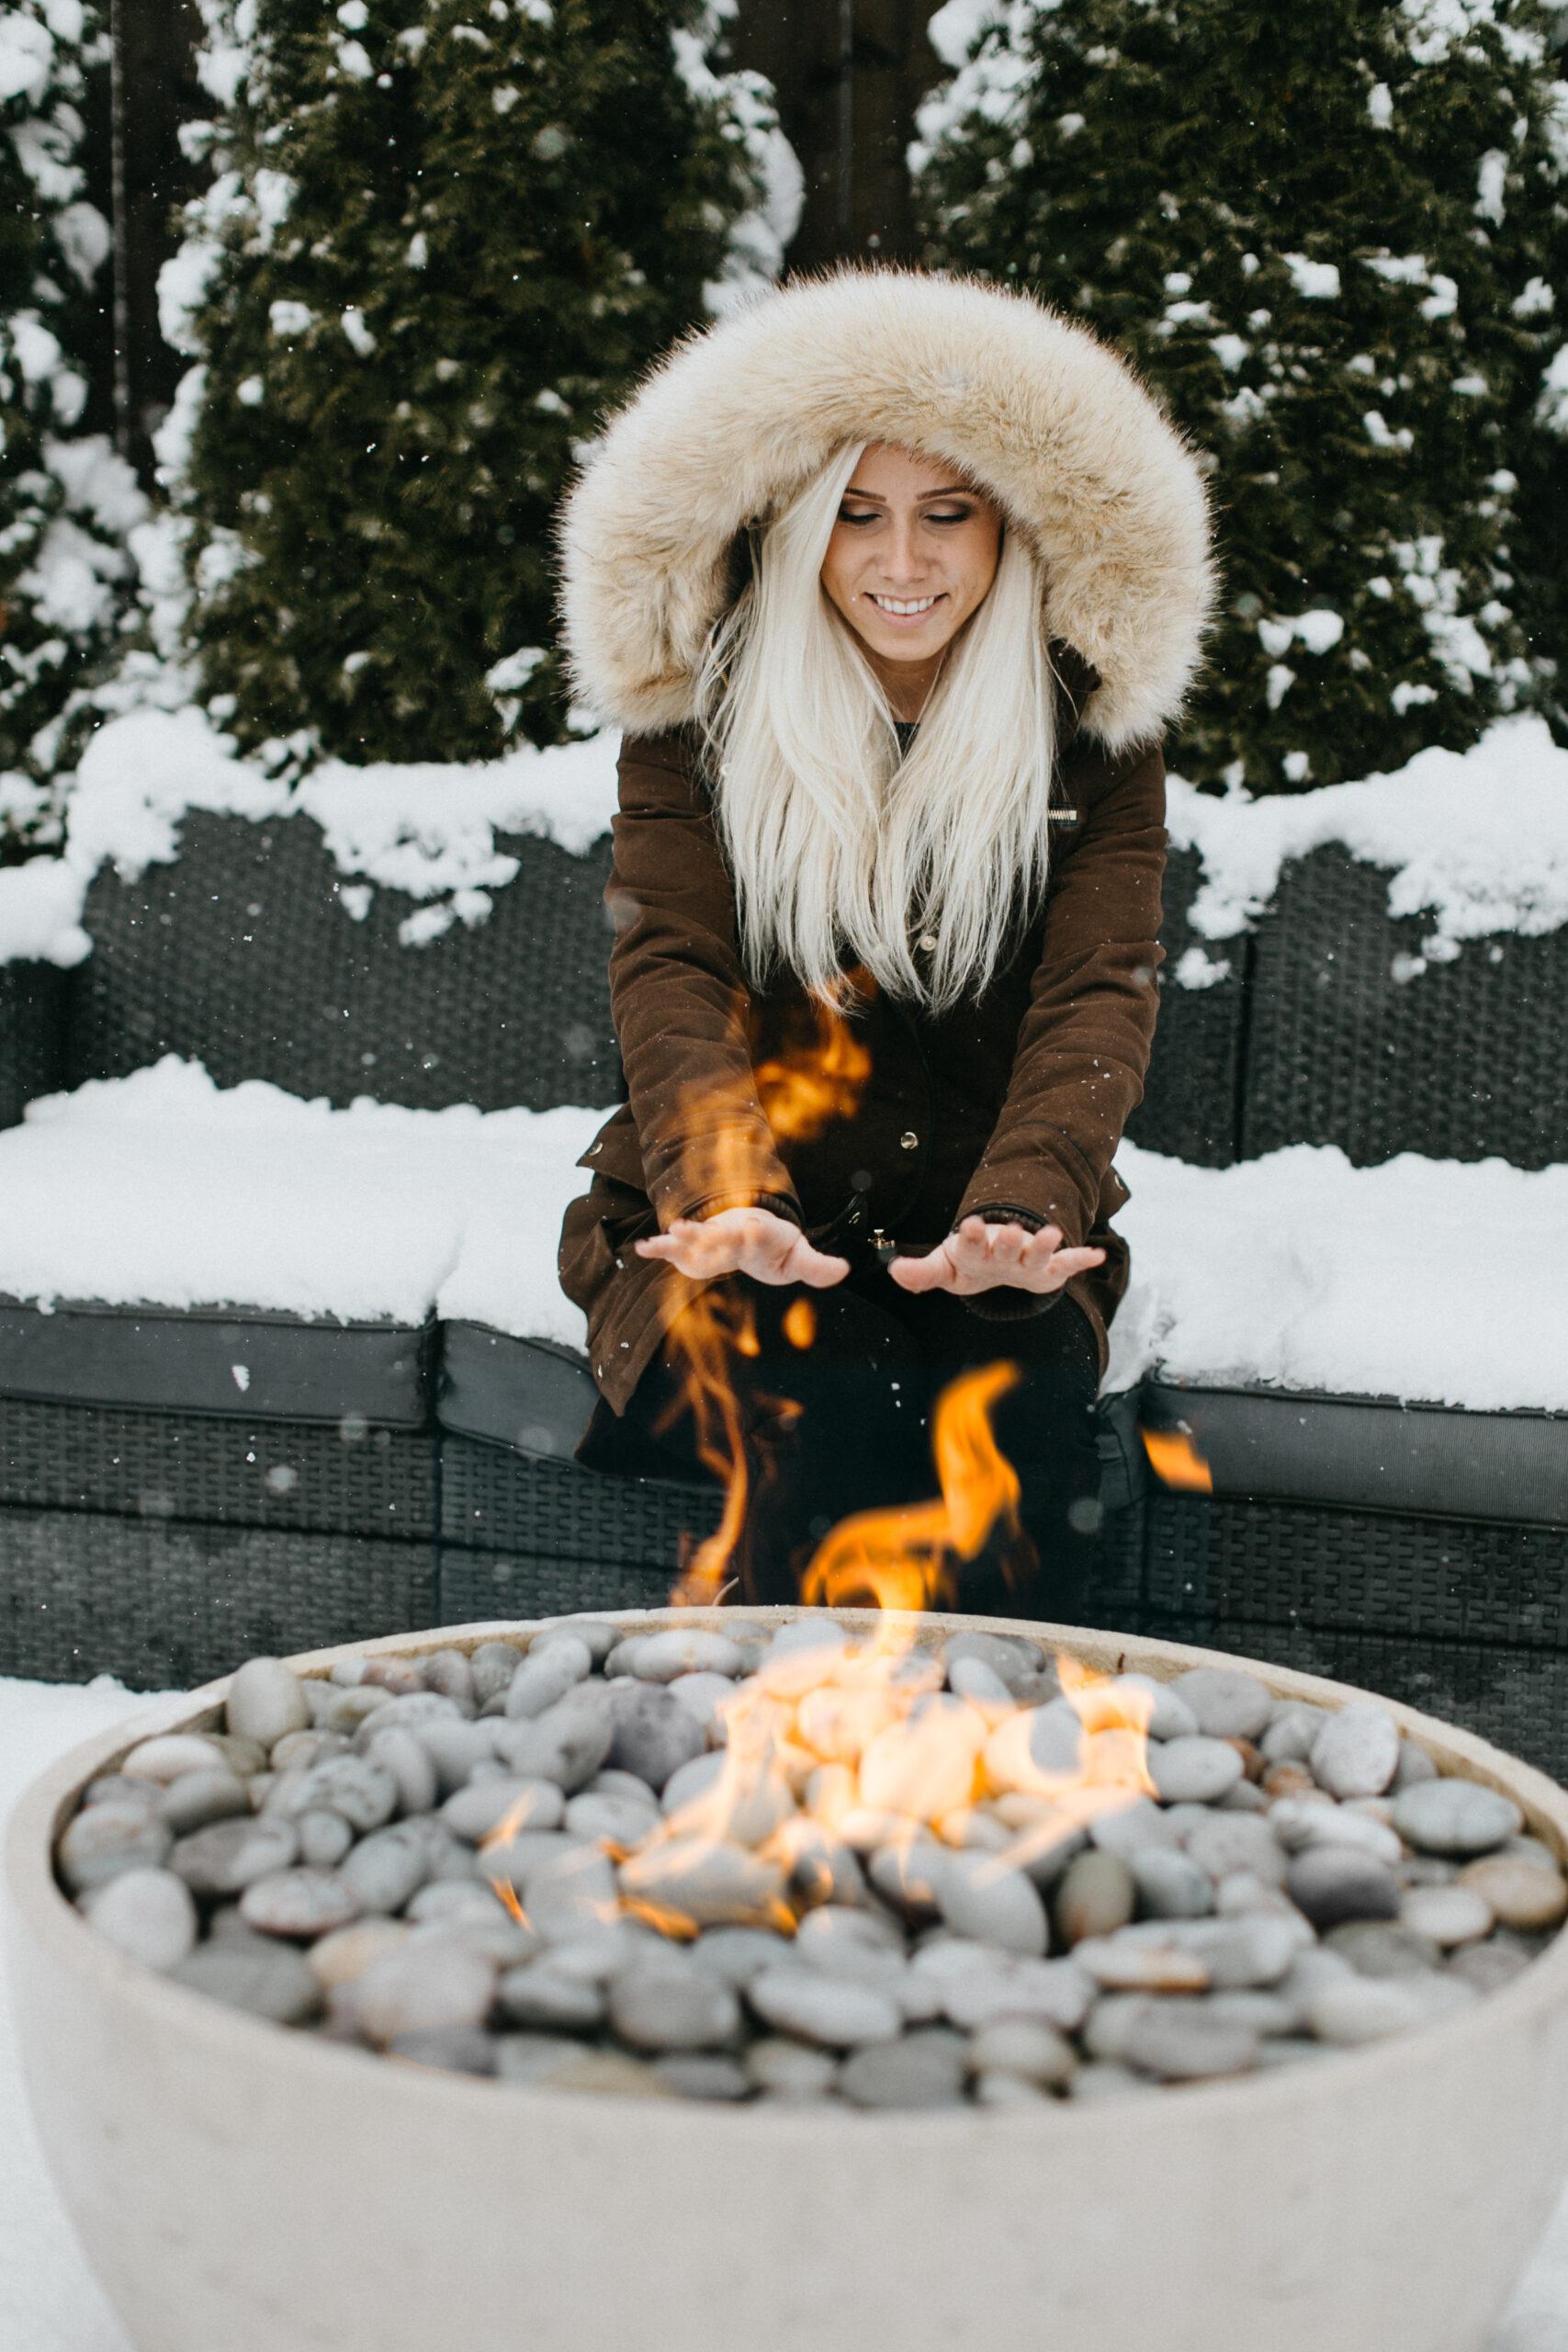 Winter Maintenance Of Your Fire Features